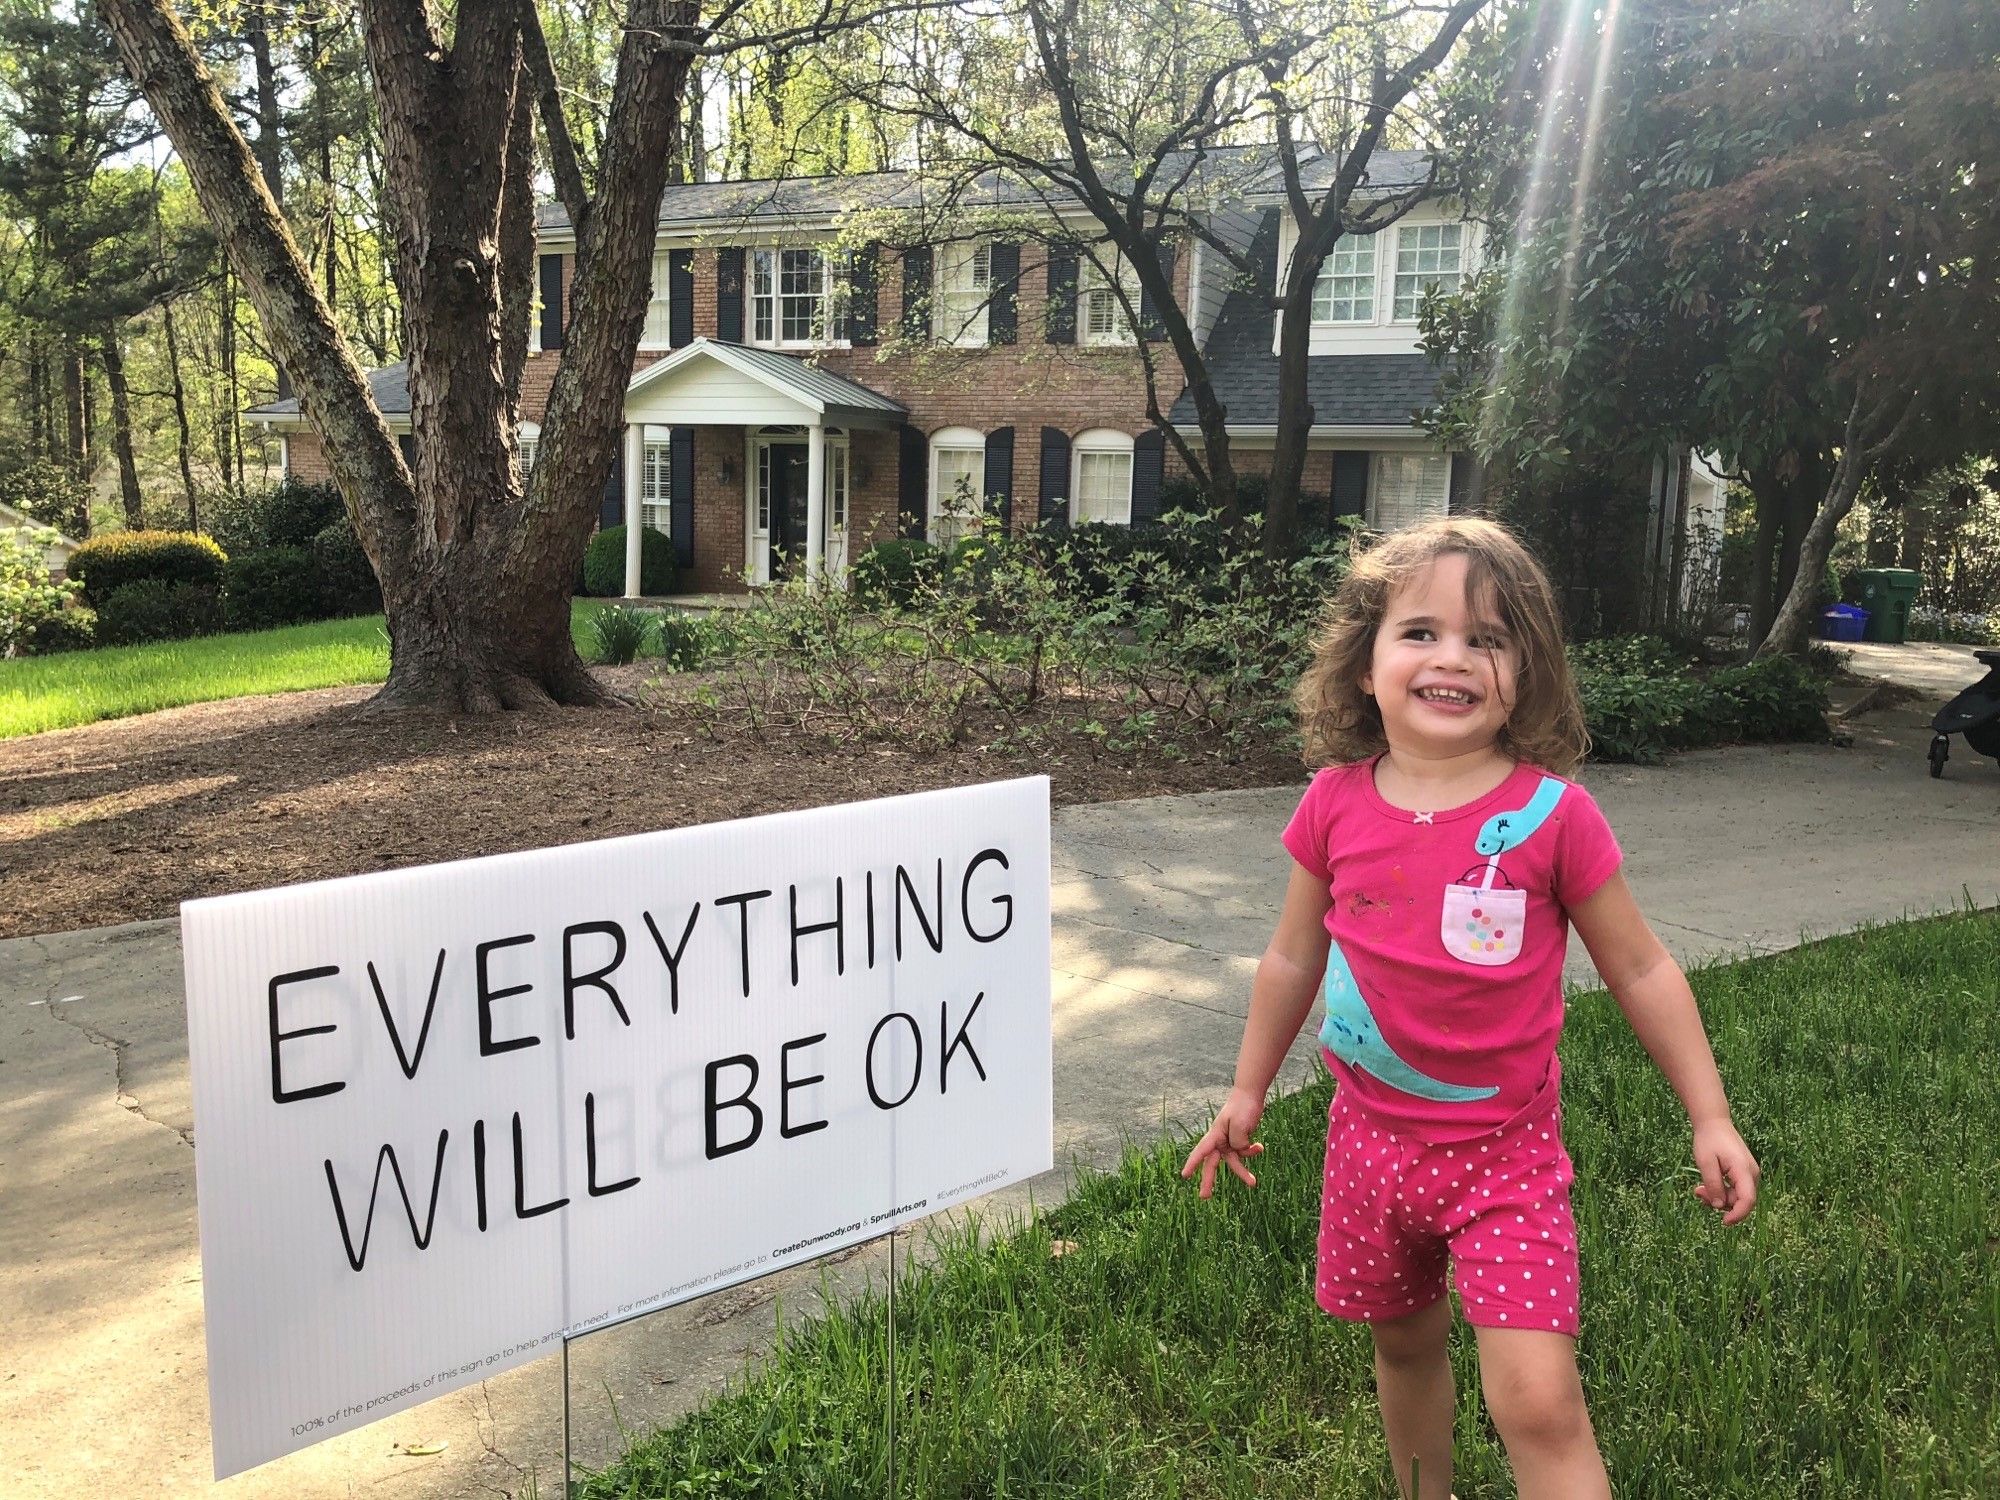 A female toddler stands next to a yard sign that says &quot;everything will be OK.&quot;